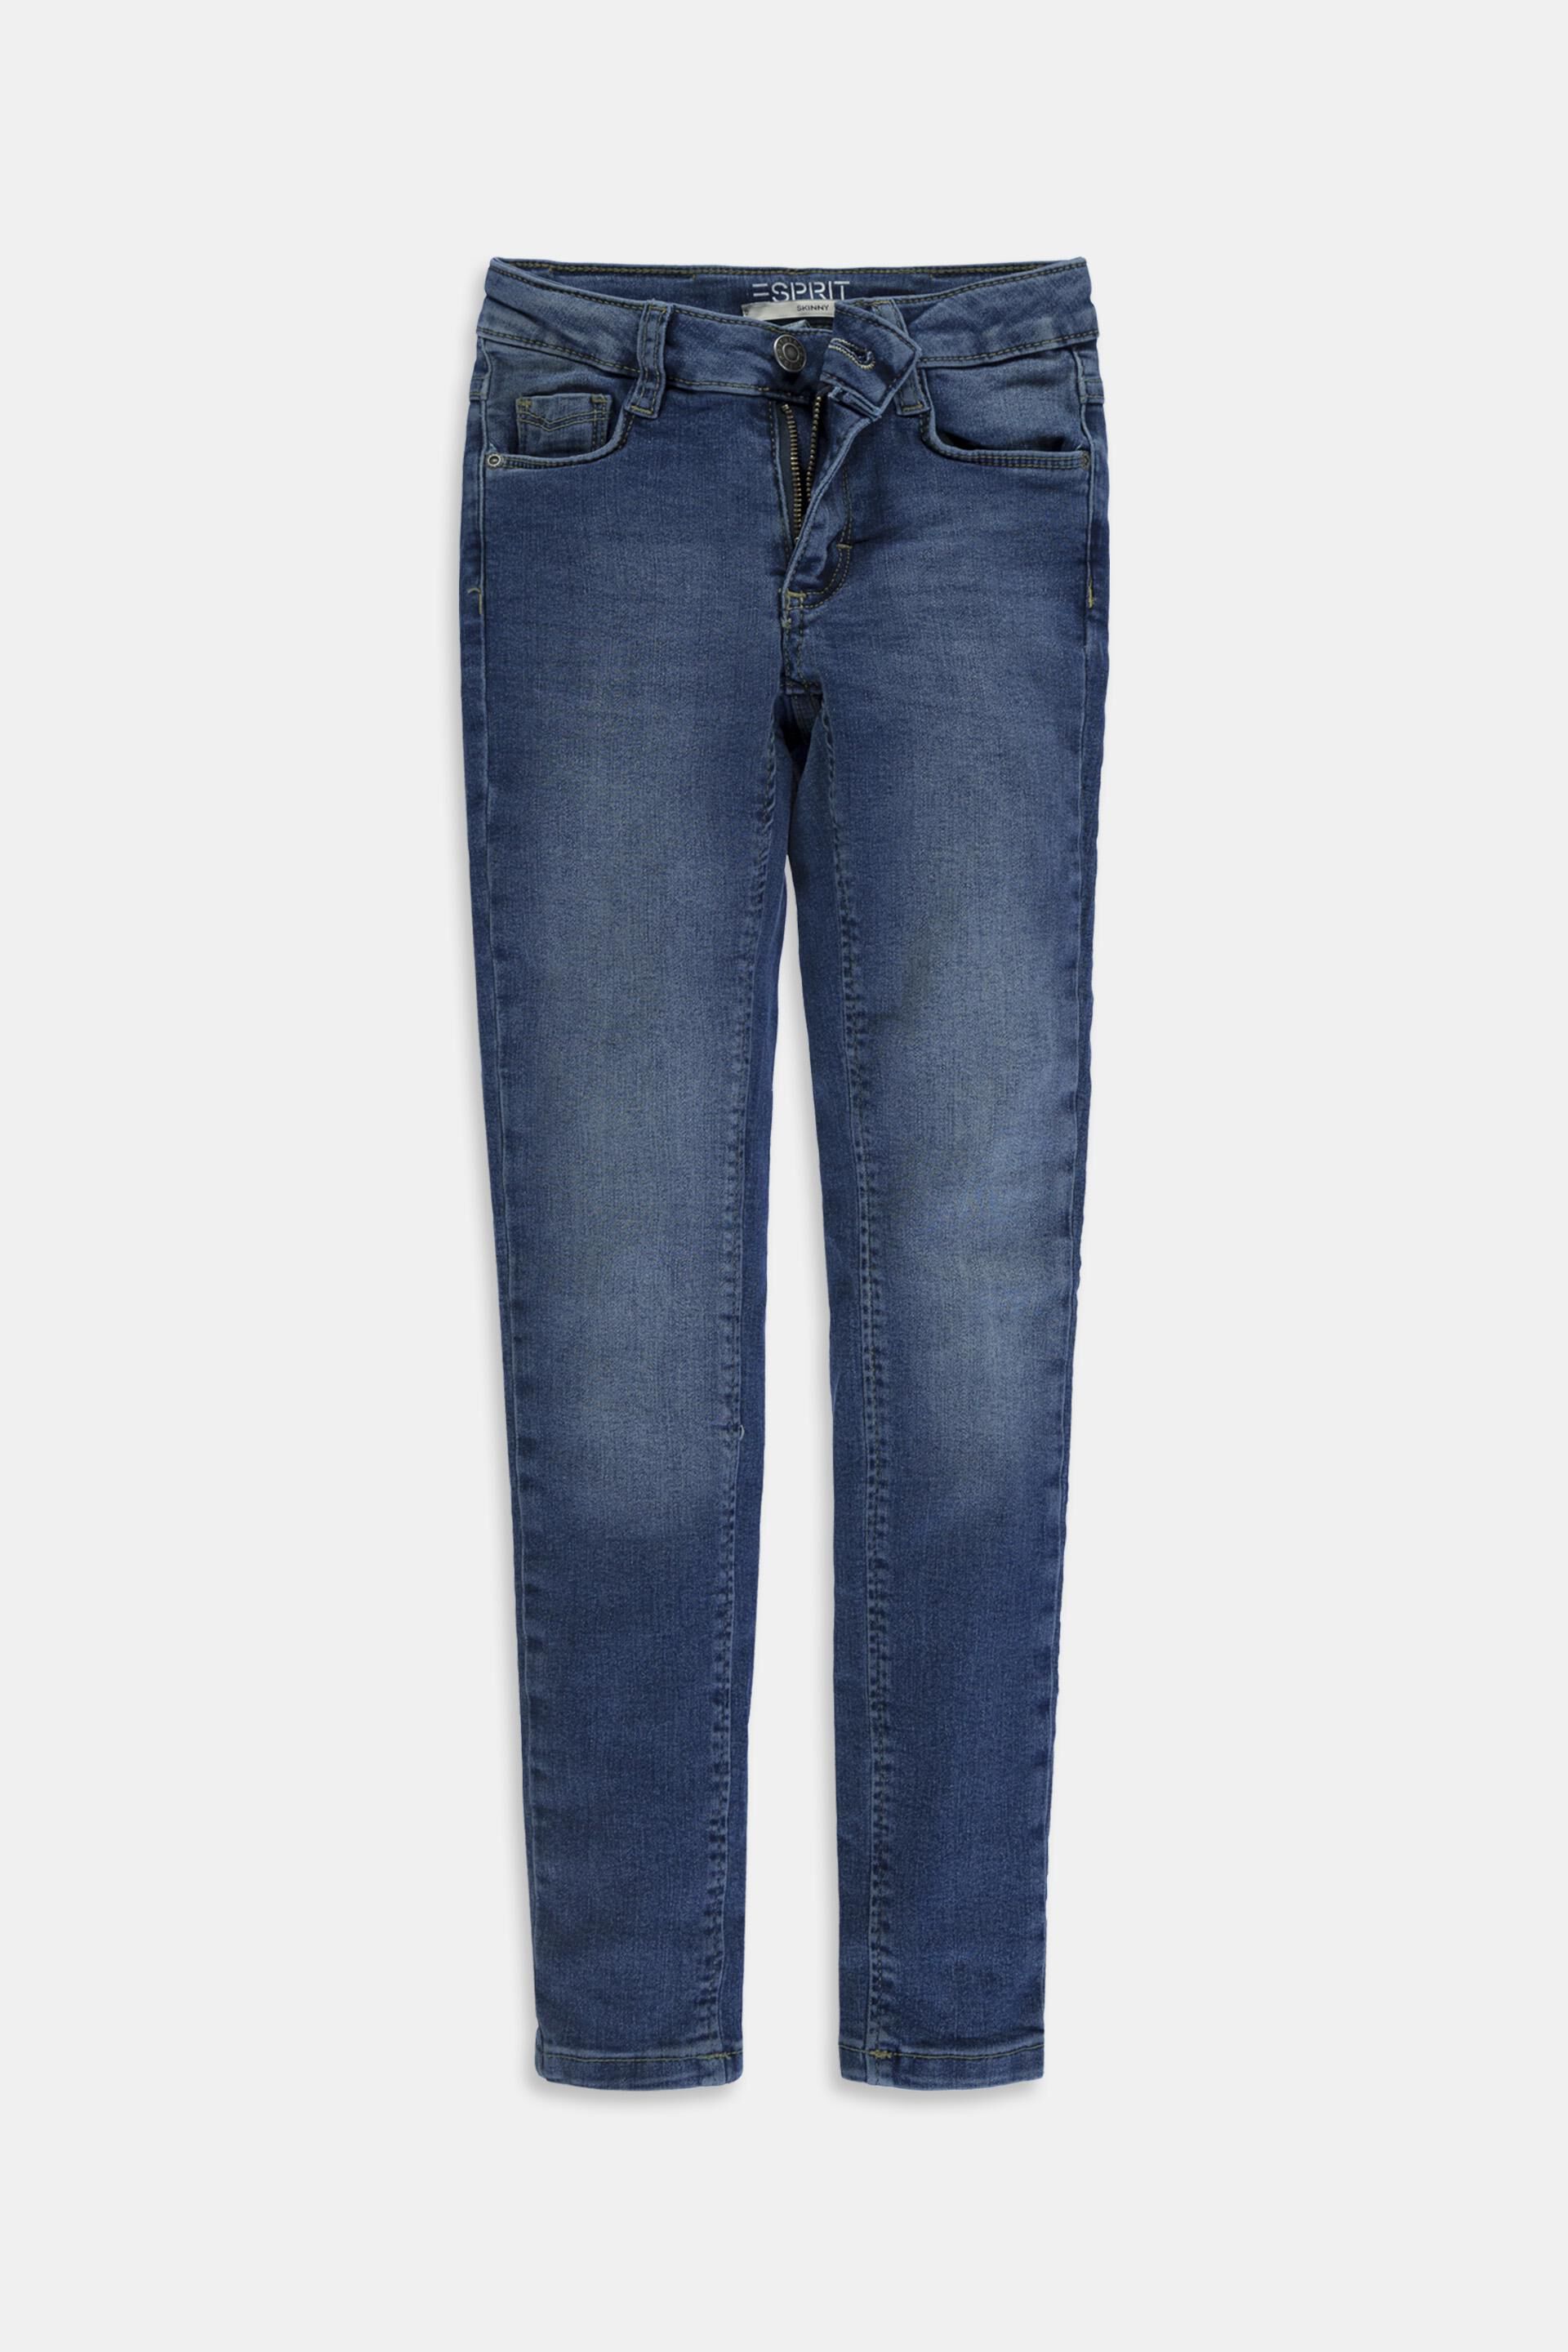 Esprit an in widths available Stretch adjustable with waistband jeans different